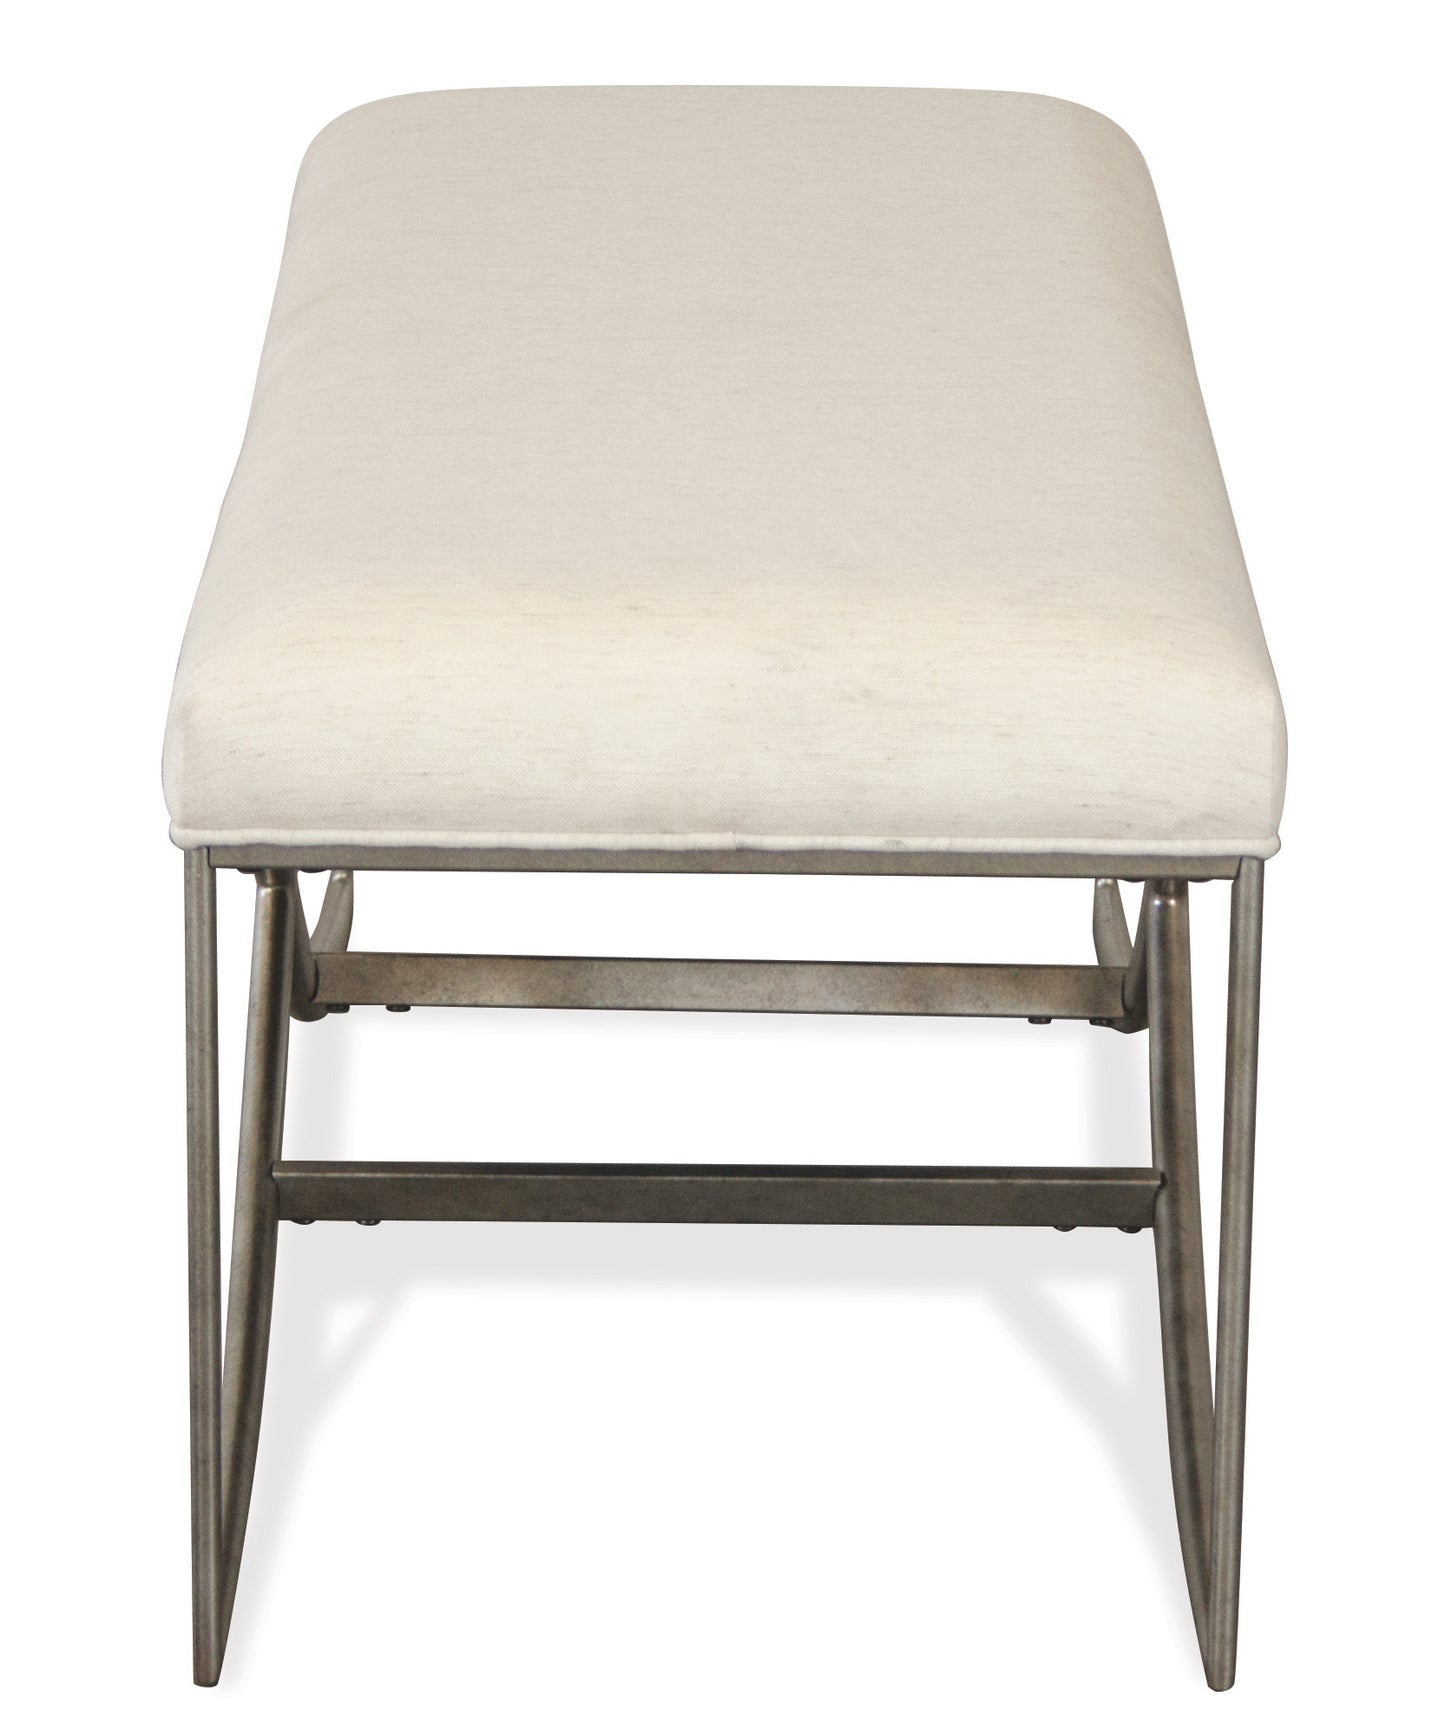 Mantalia Upholstered Bench with Metal Frame, Champagne